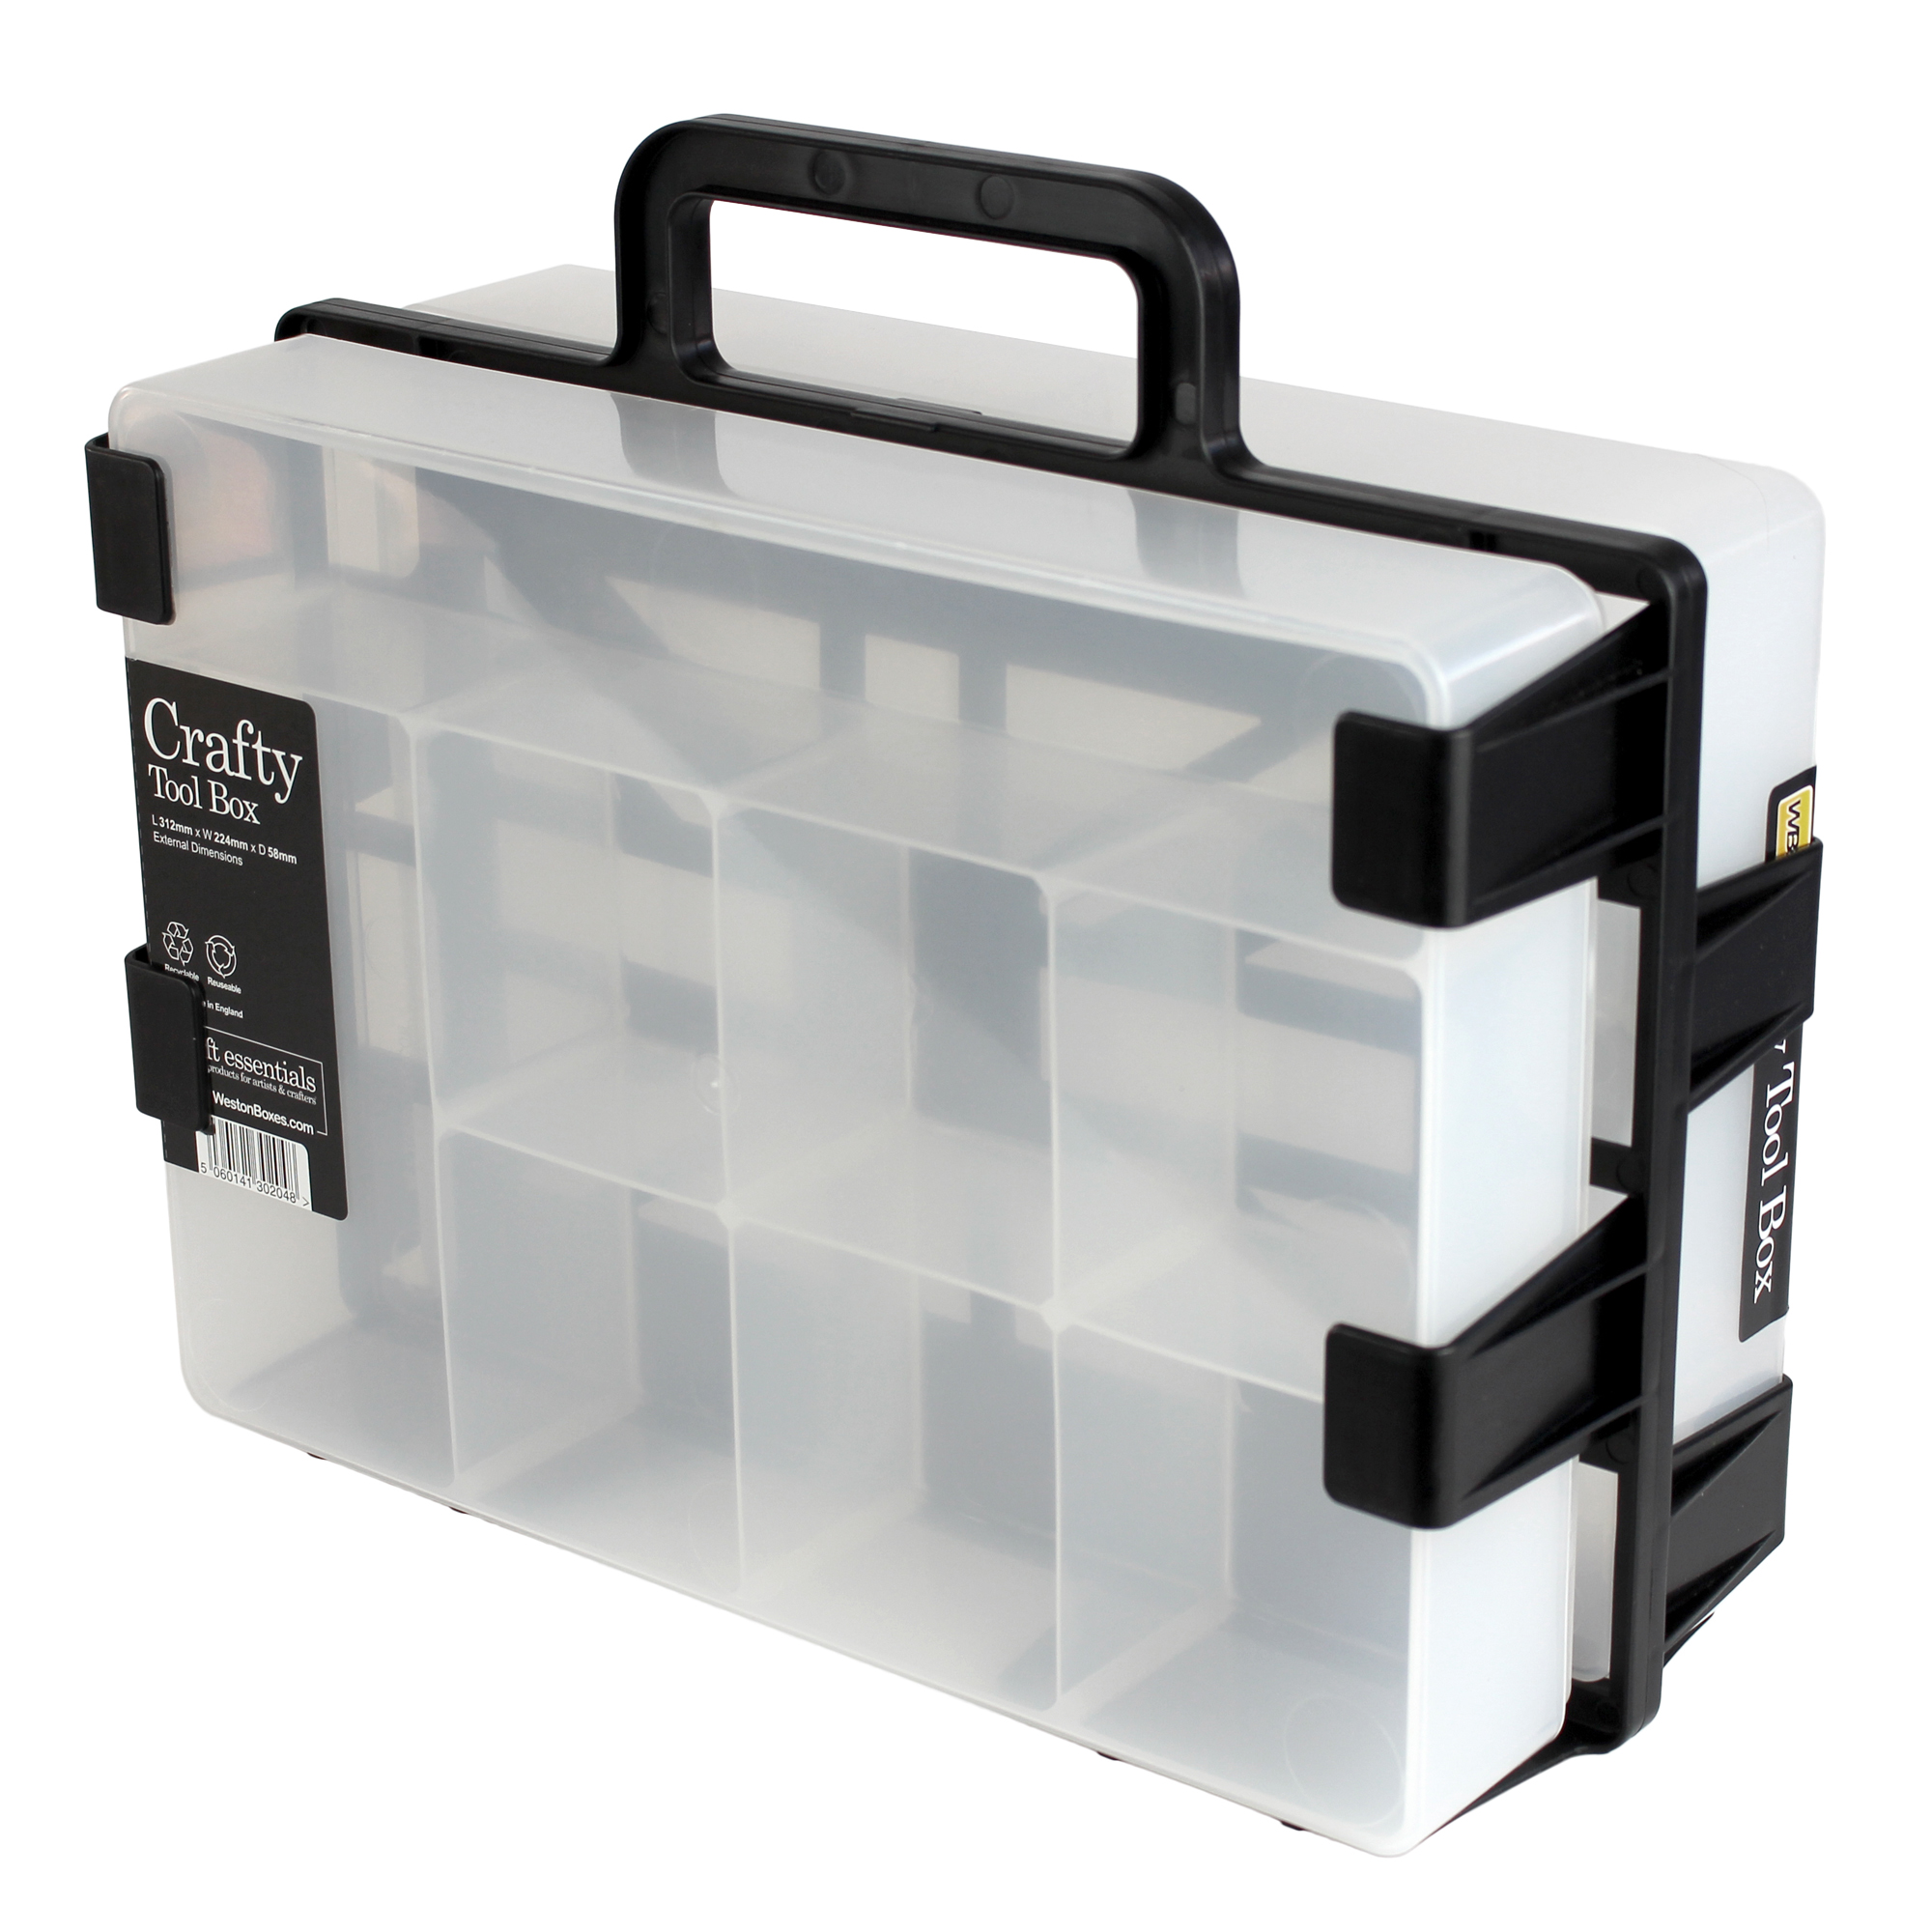 Crafty Tool Box Carrier - Trade